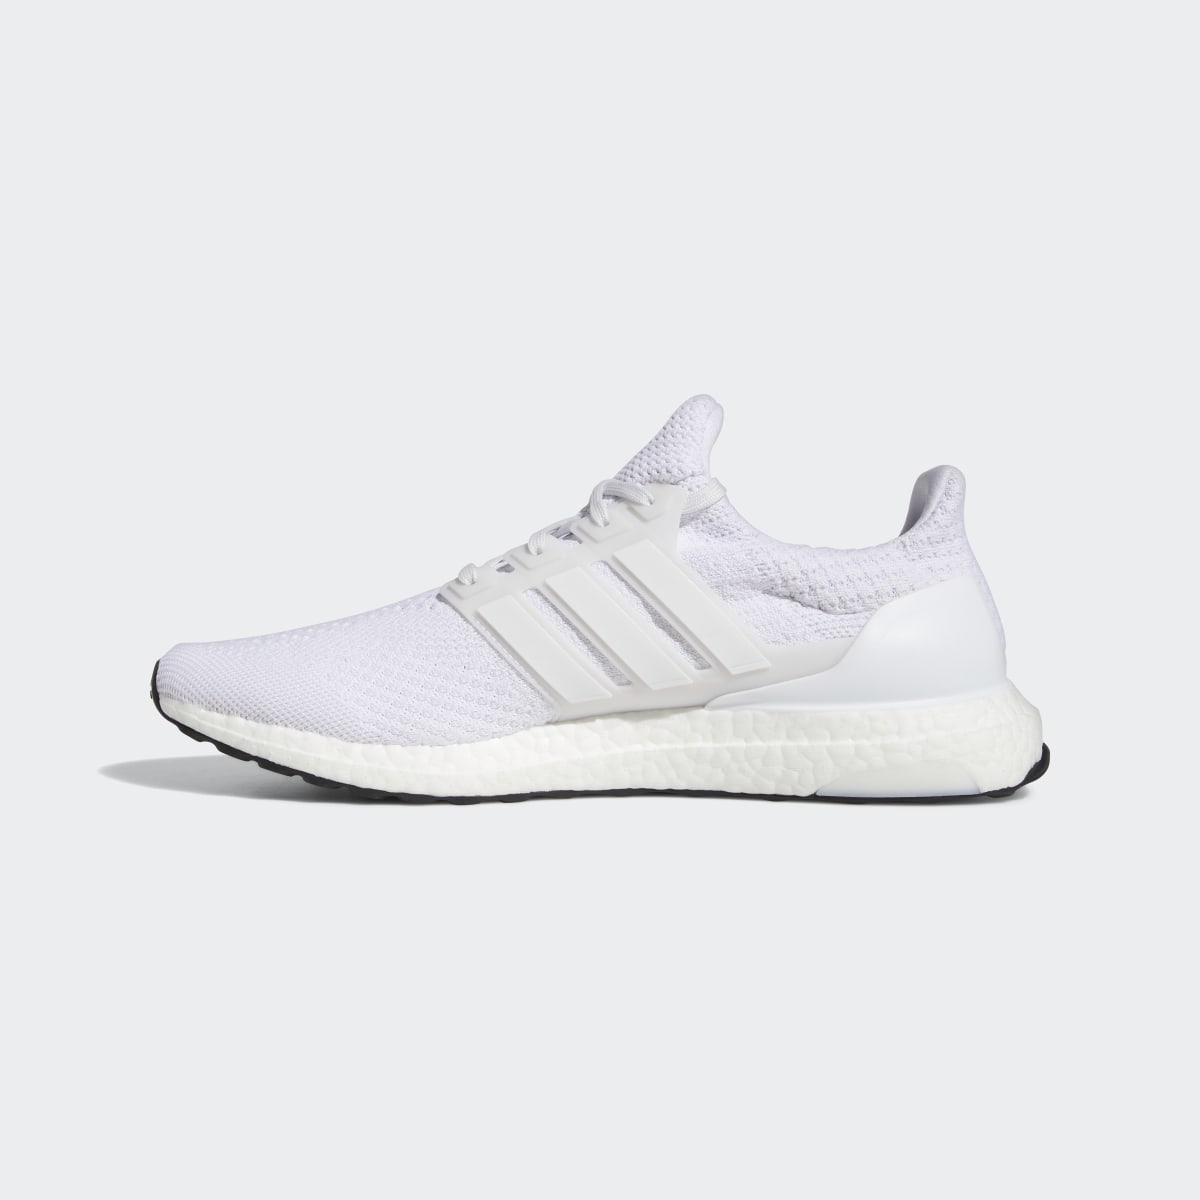 Adidas Ultraboost DNA 5.0 Shoes. 8